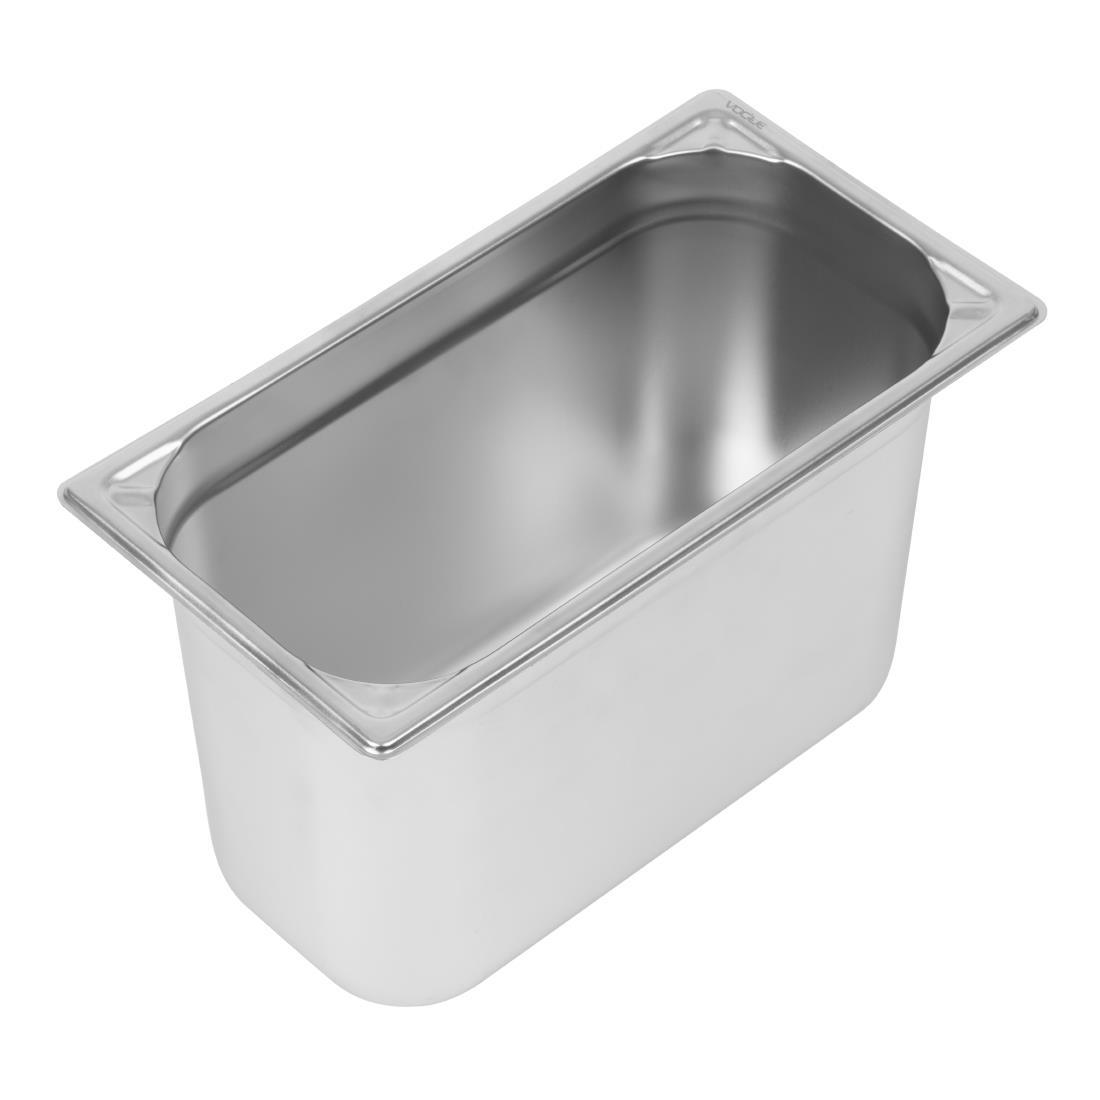 Vogue Heavy Duty Stainless Steel 1/3 Gastronorm Pan 200mm - DW445  - 1